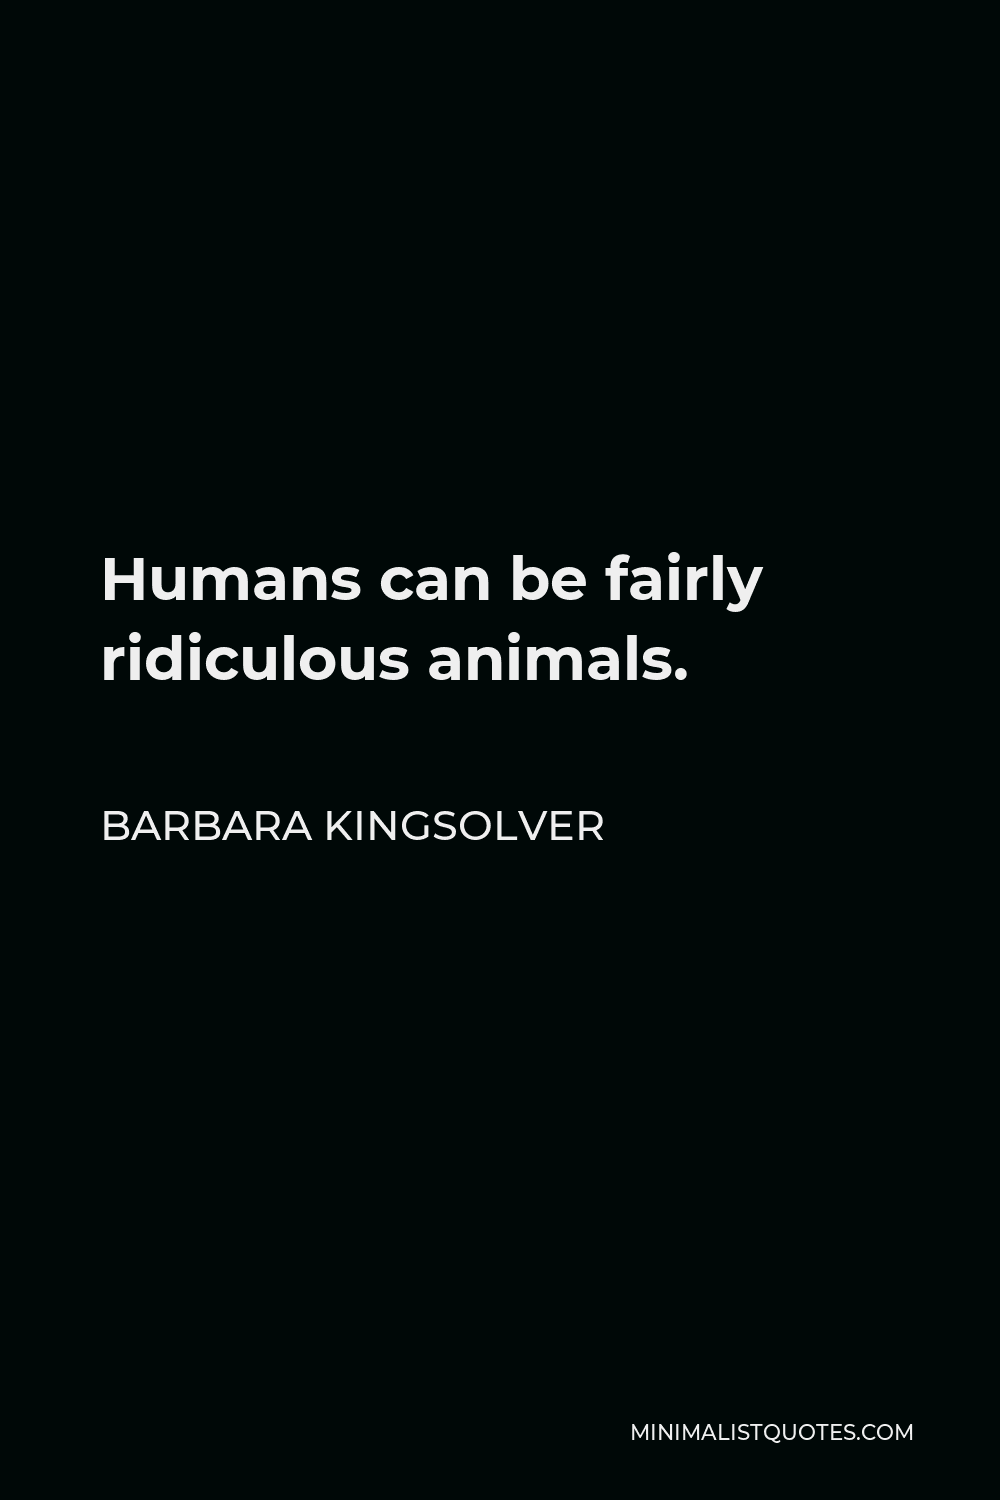 Barbara Kingsolver Quote - Humans can be fairly ridiculous animals.